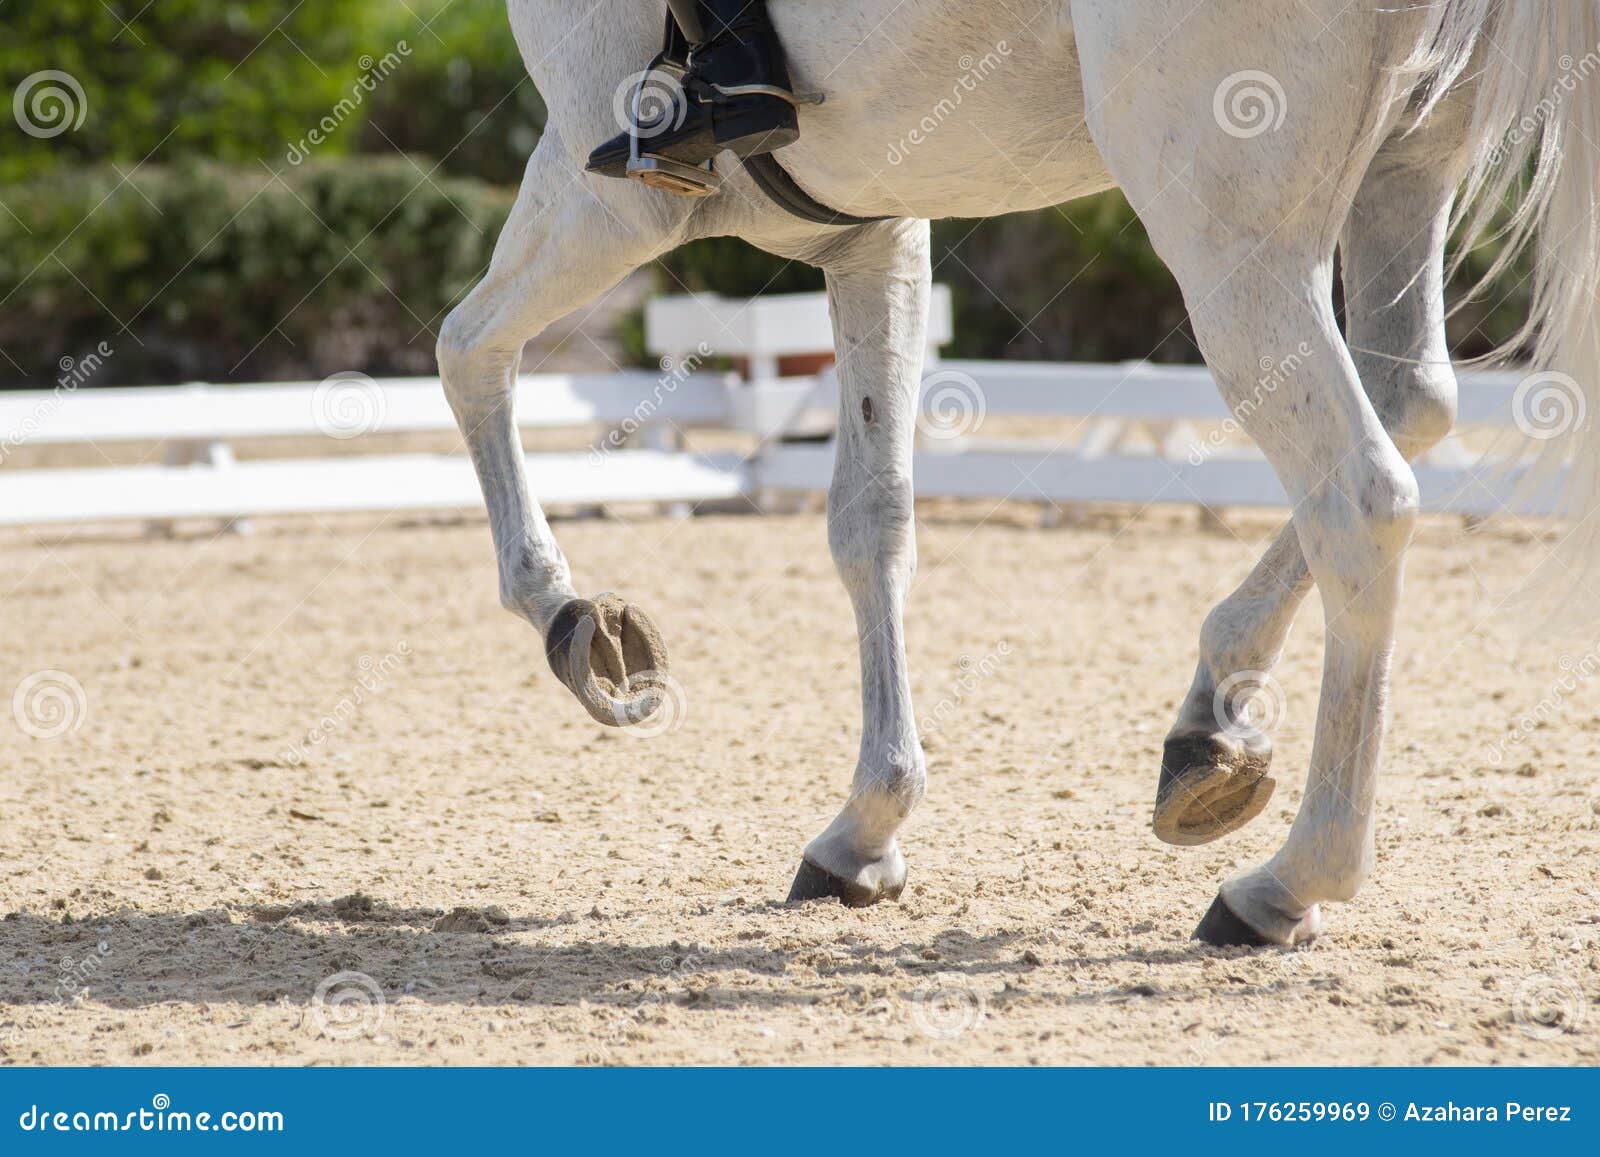 legs and hoofs of a mare in a dressage grand prix test